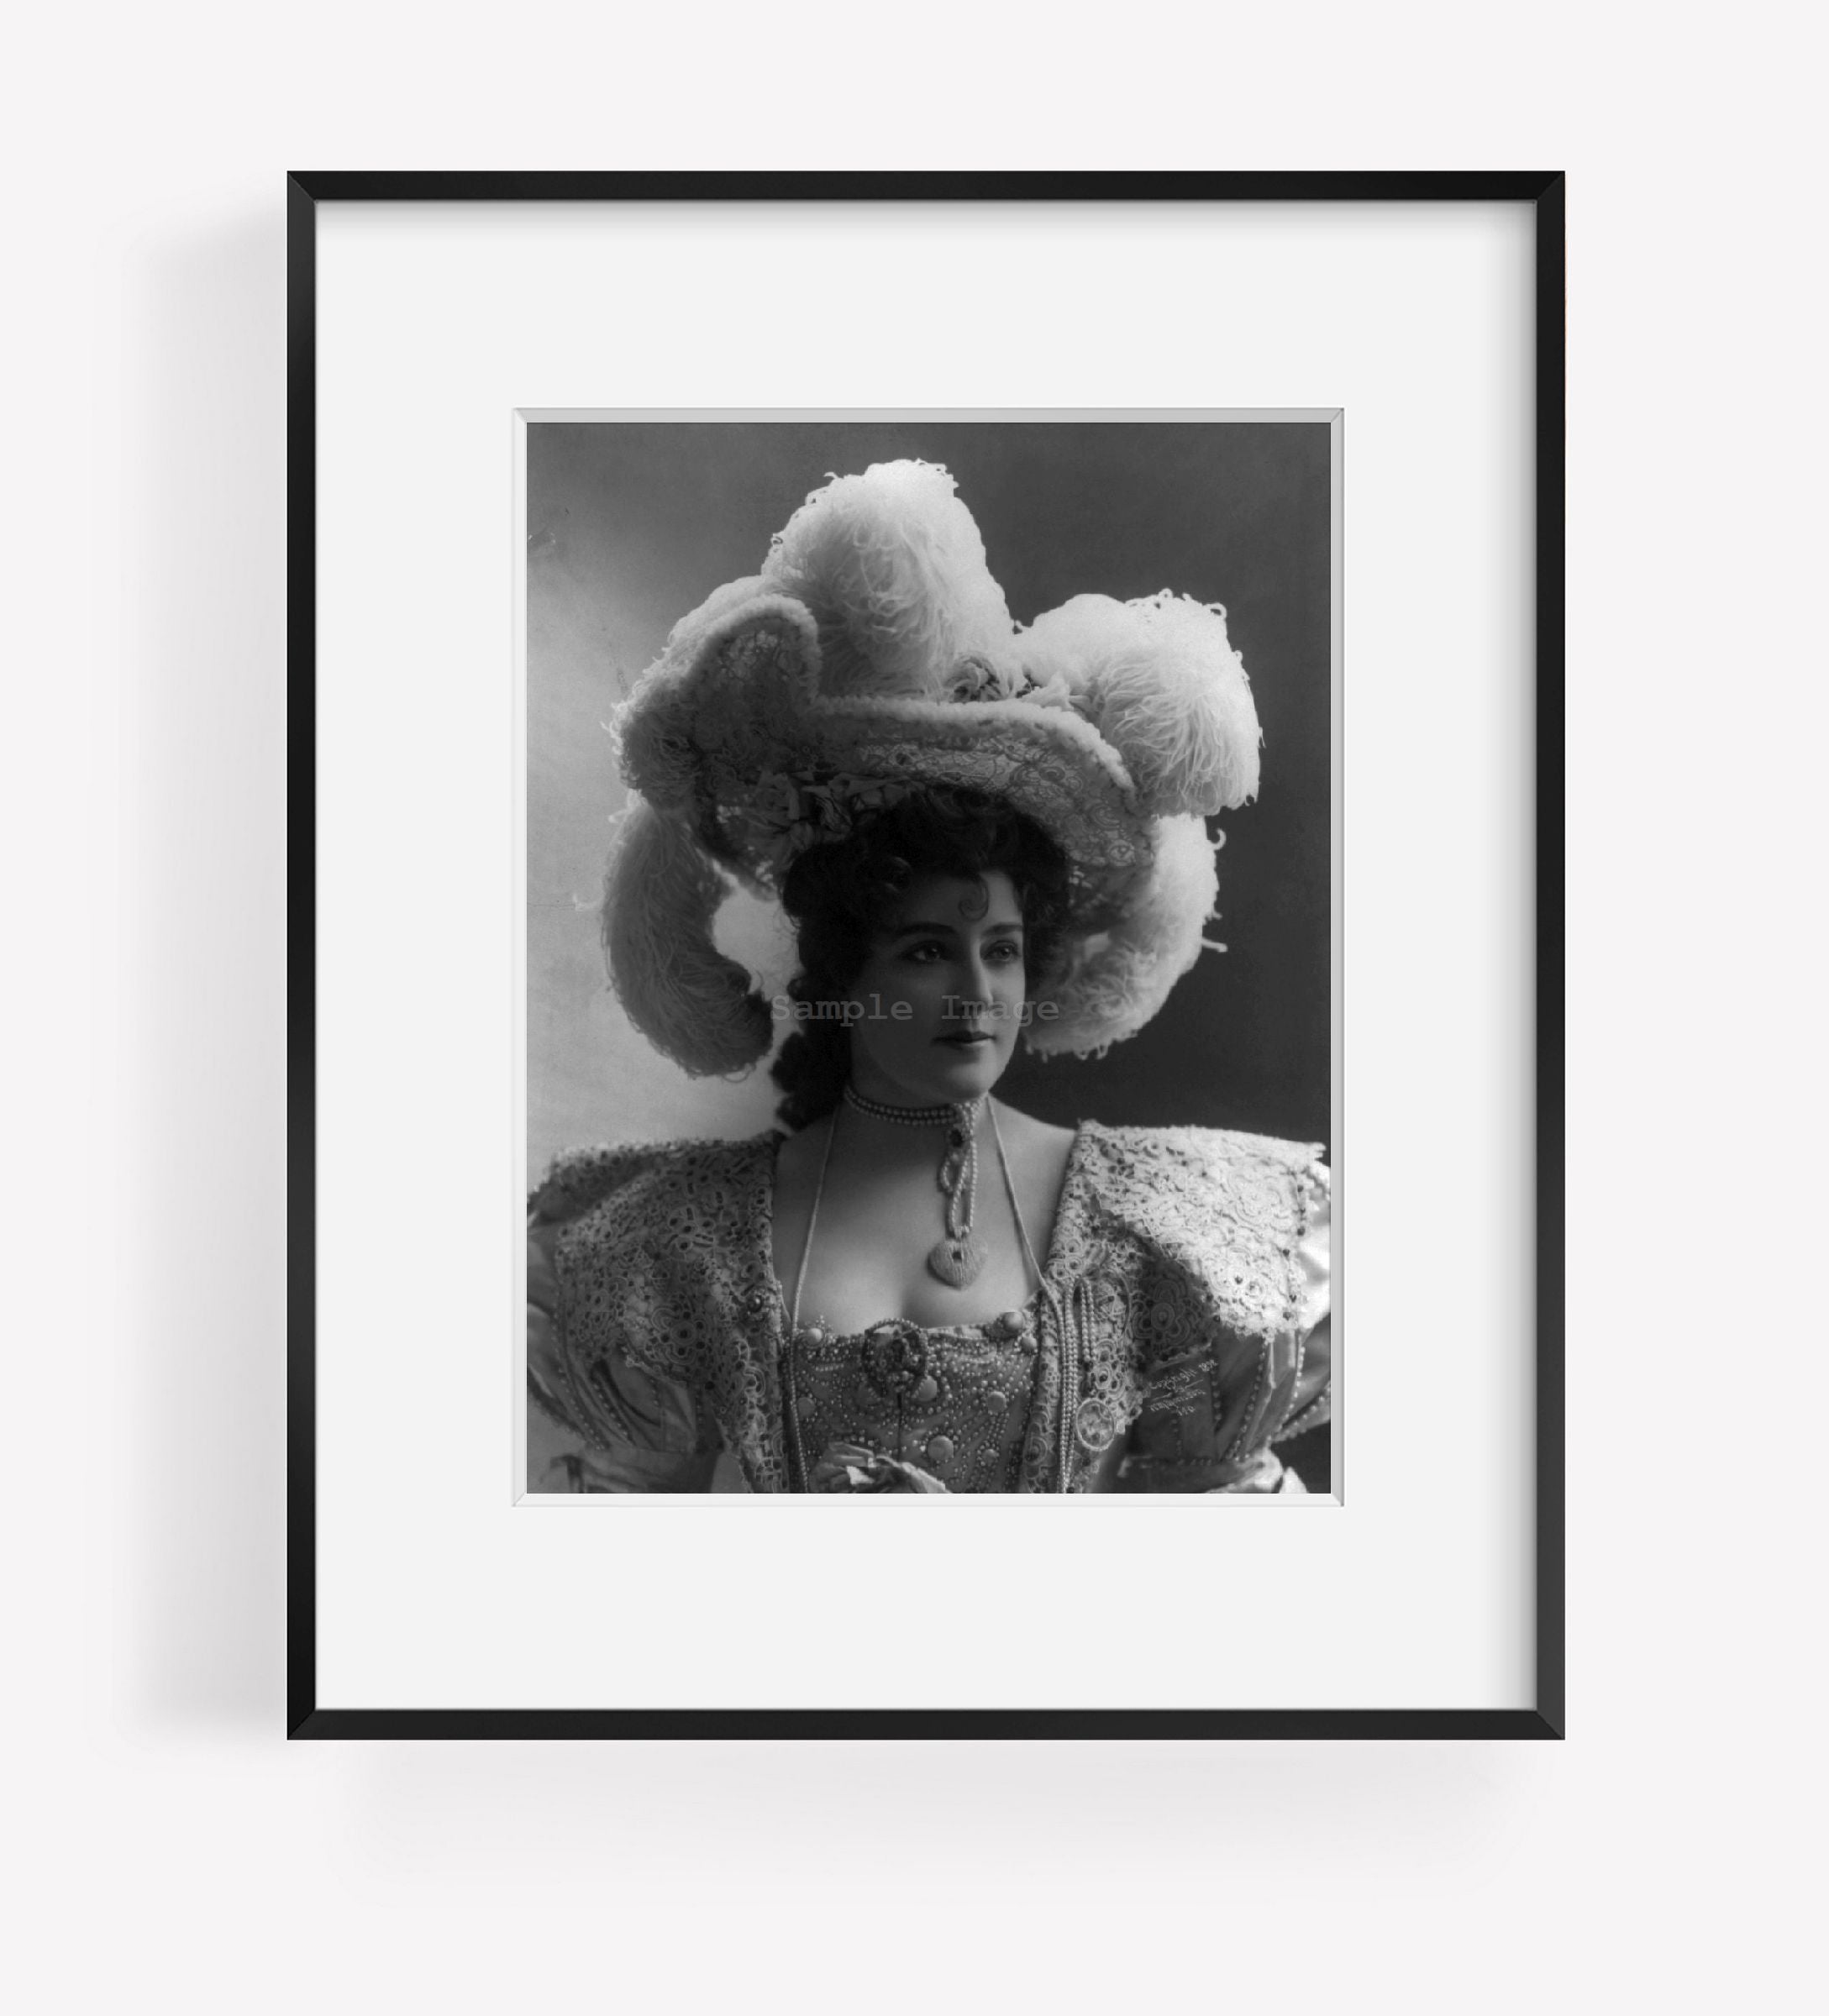 Photo: Lillian Russell, 1861-1922, America, actress, singer, famous